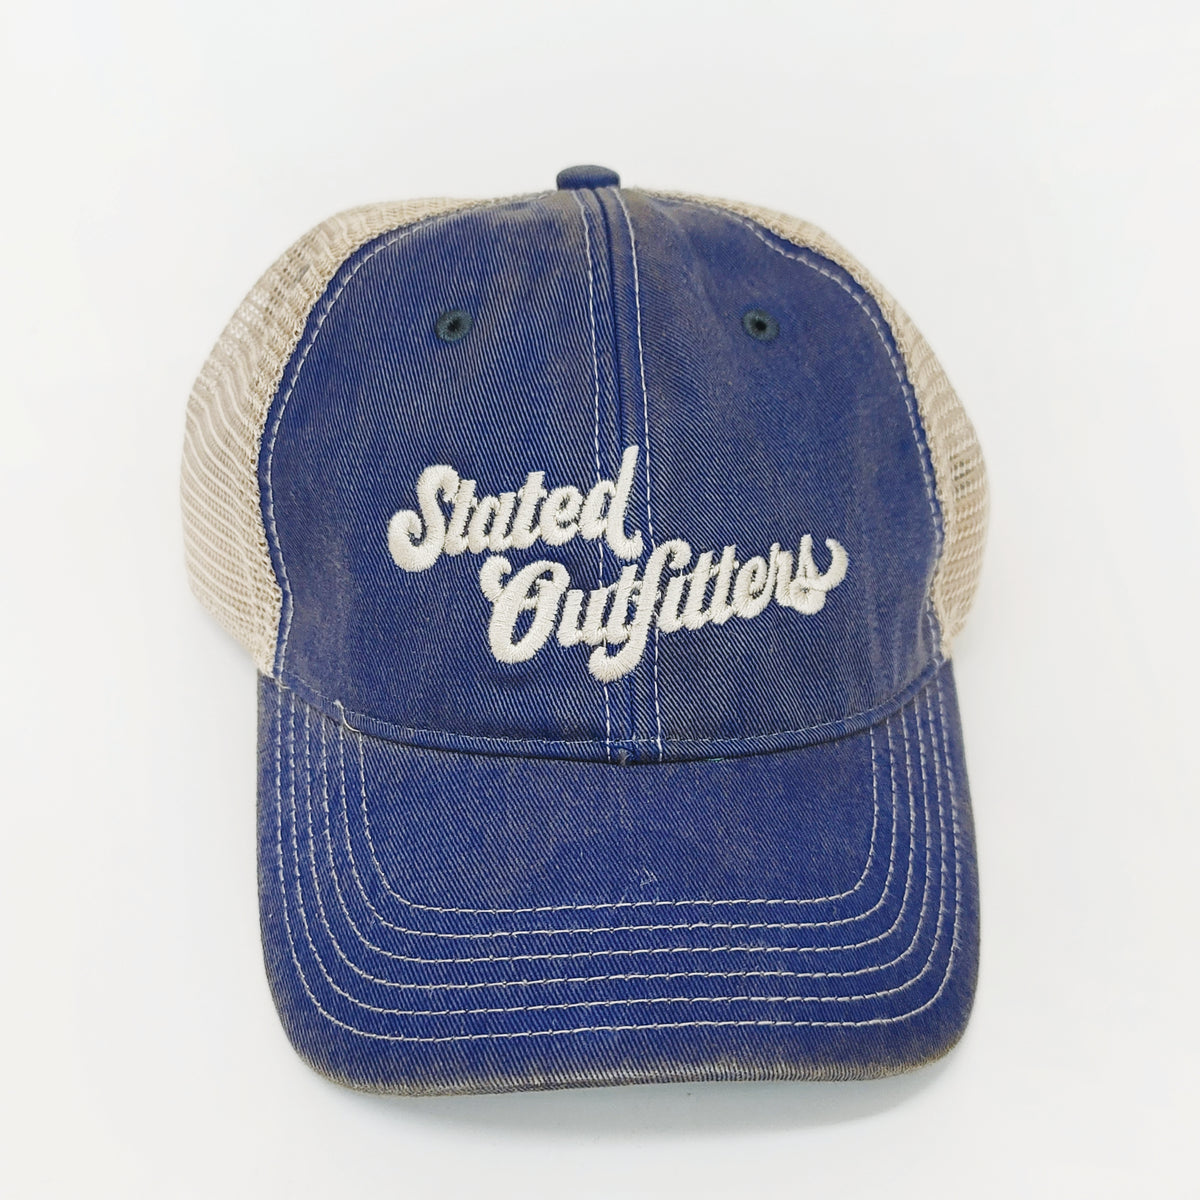 Stated Outfitters Embroidered Navy Hat